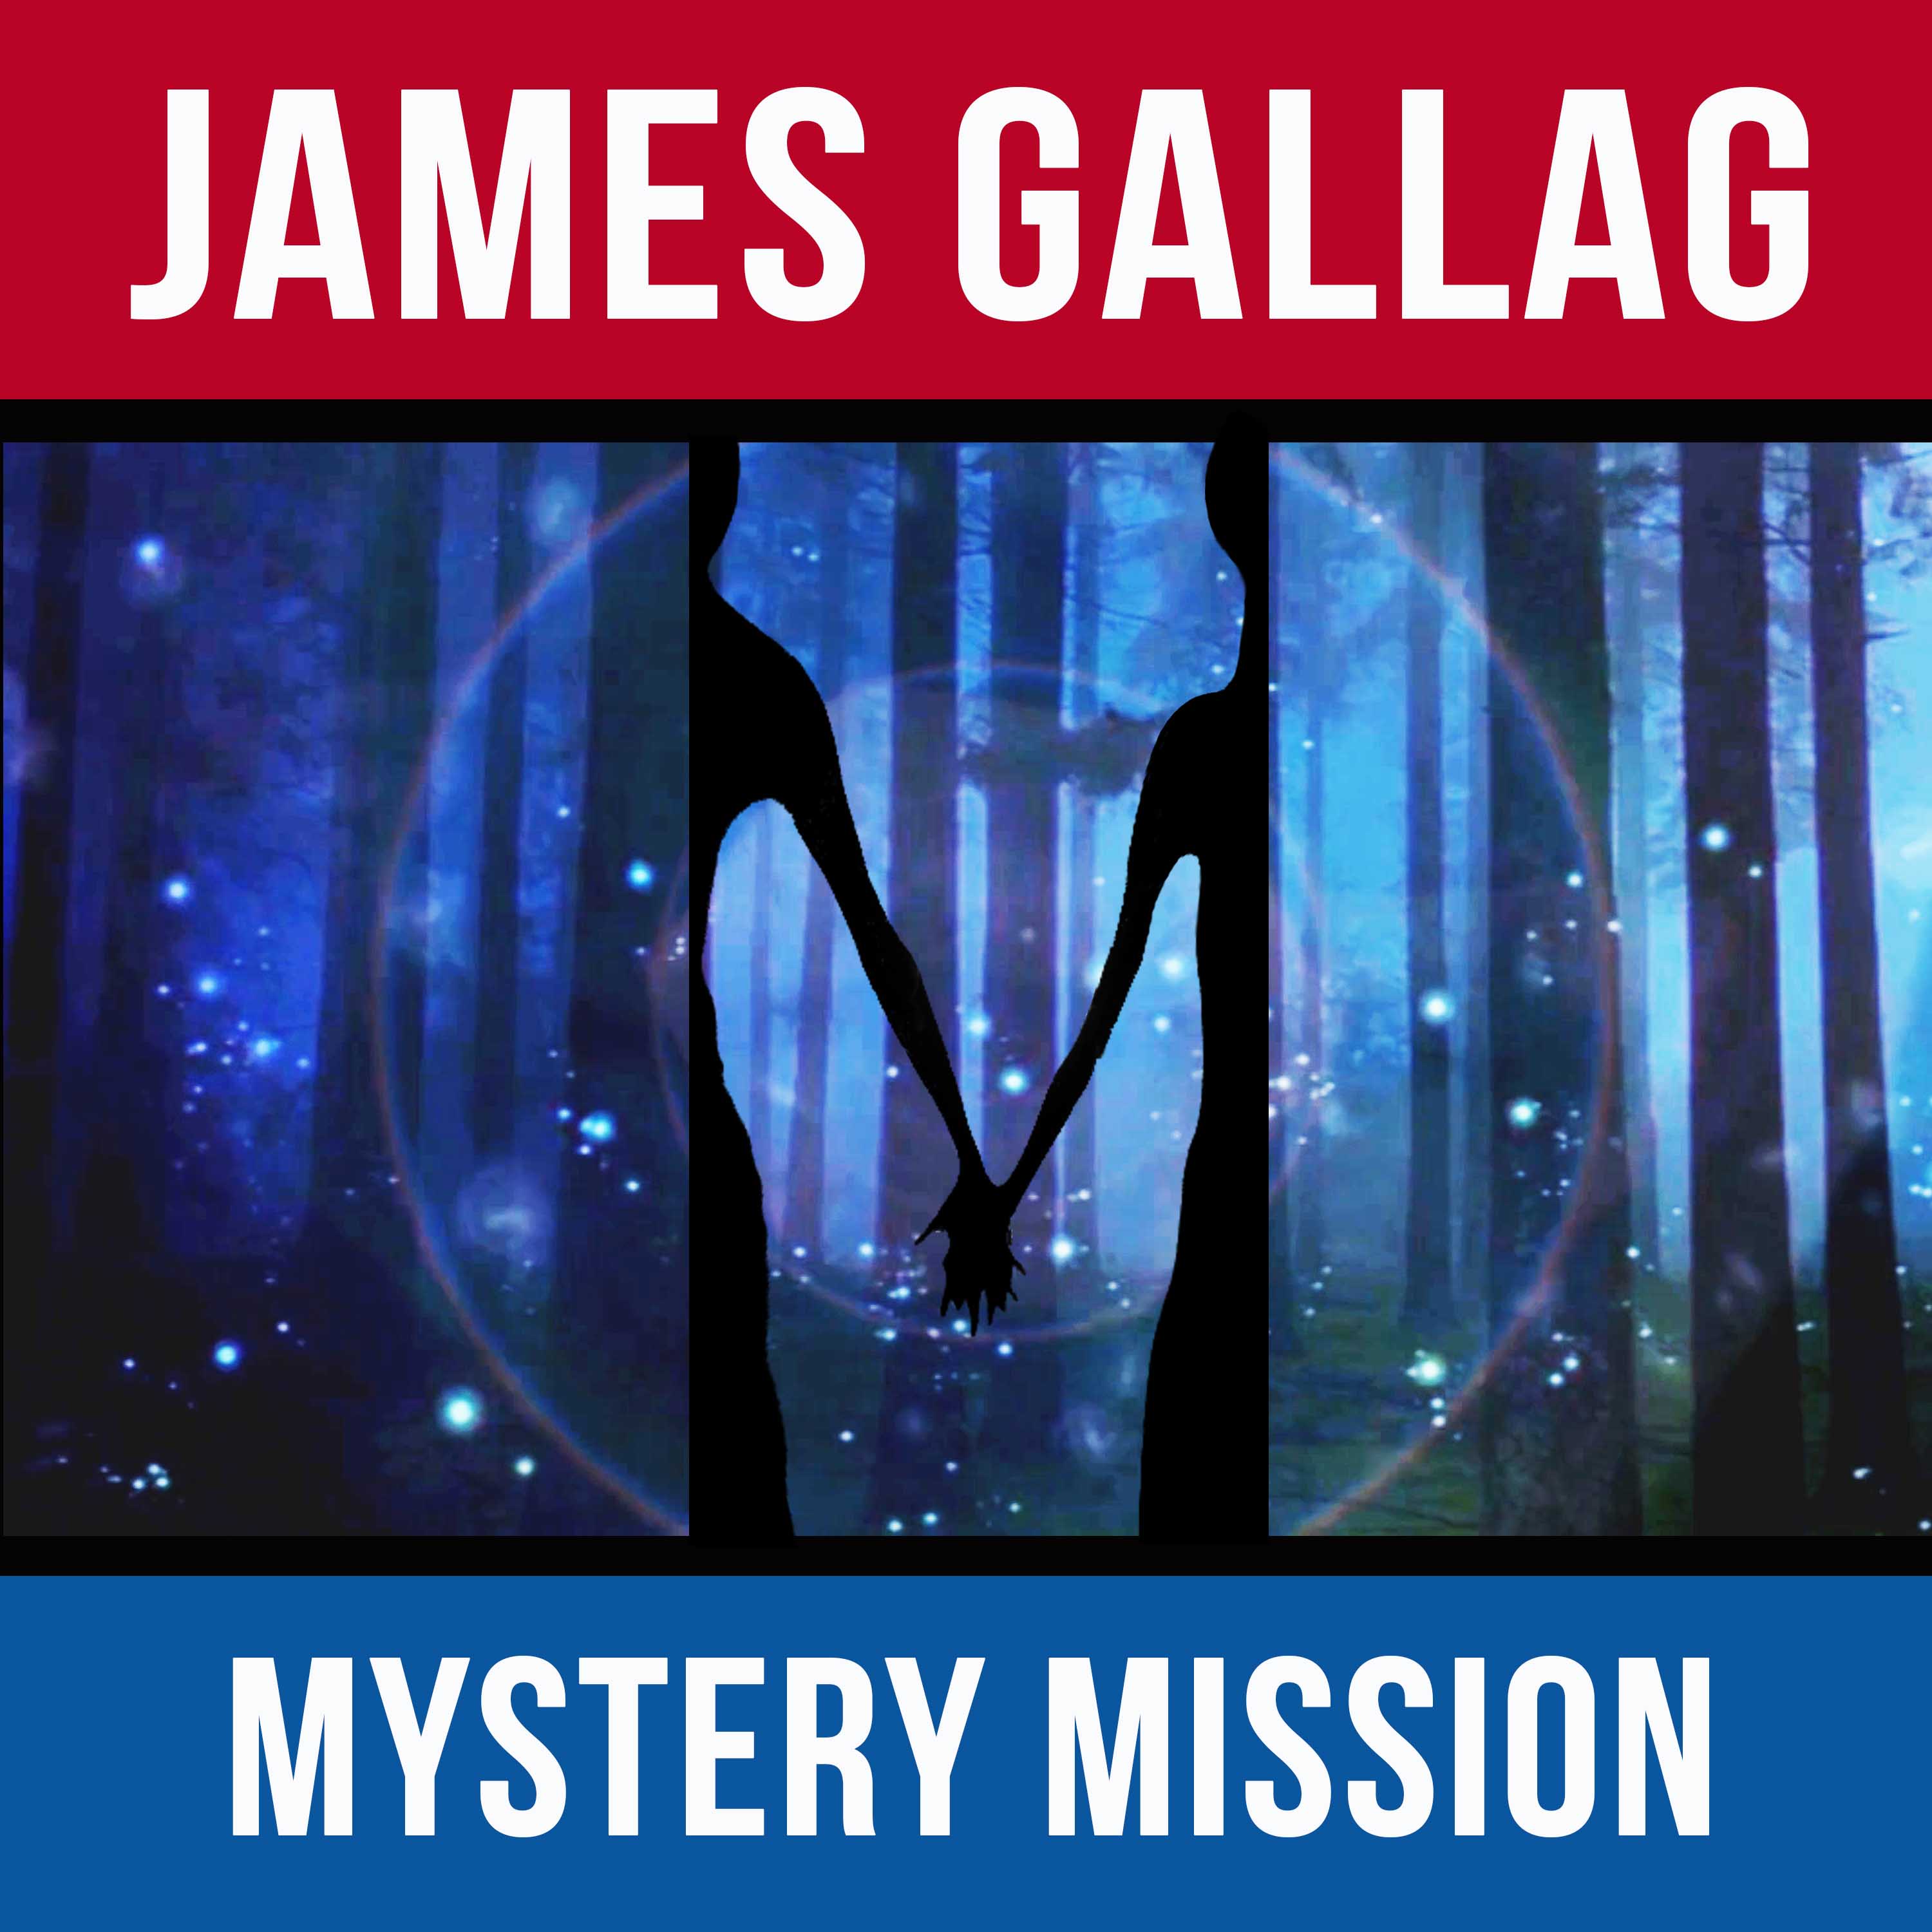 james gallag mystery mission